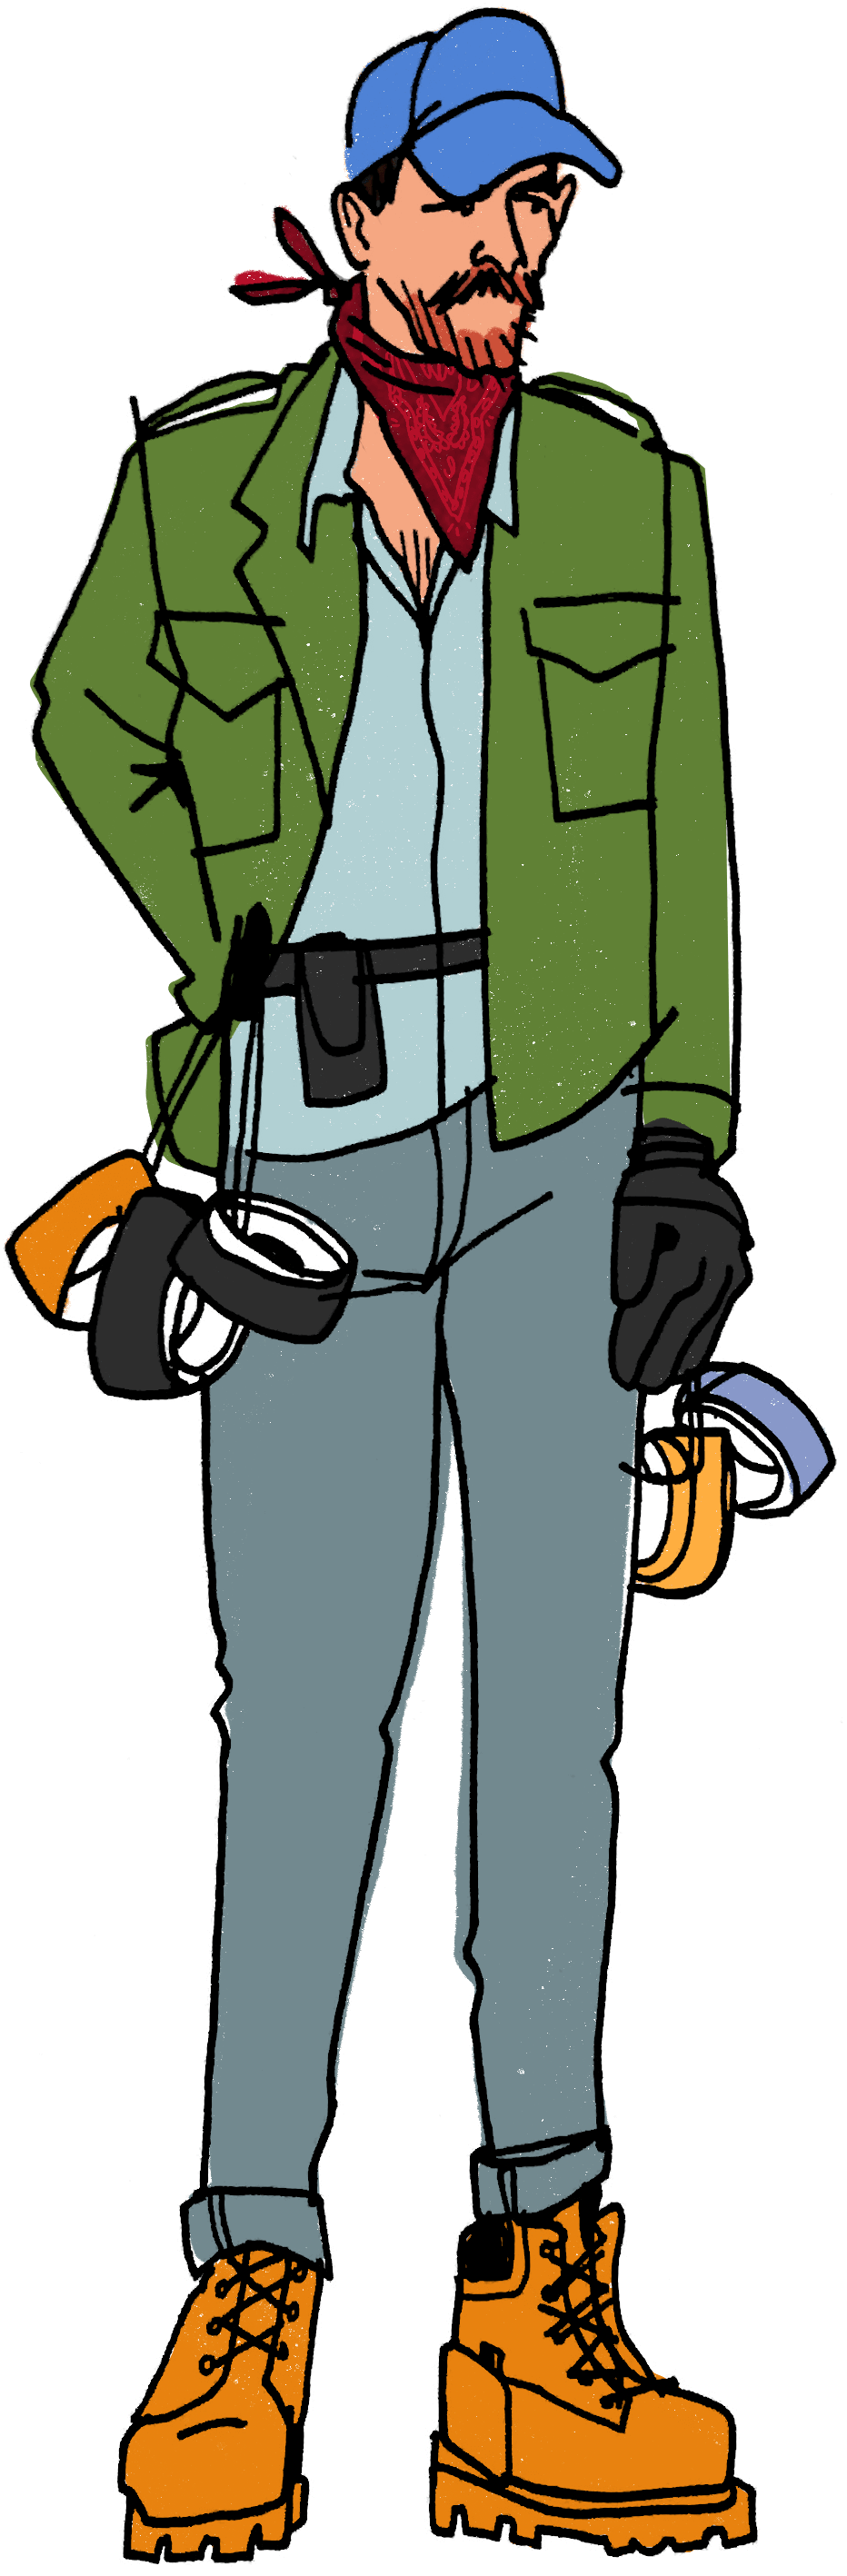 Illustration by Nono Flores of gaffer, a man wearing a blue hat, red bandana, green jacket, and black gloves.